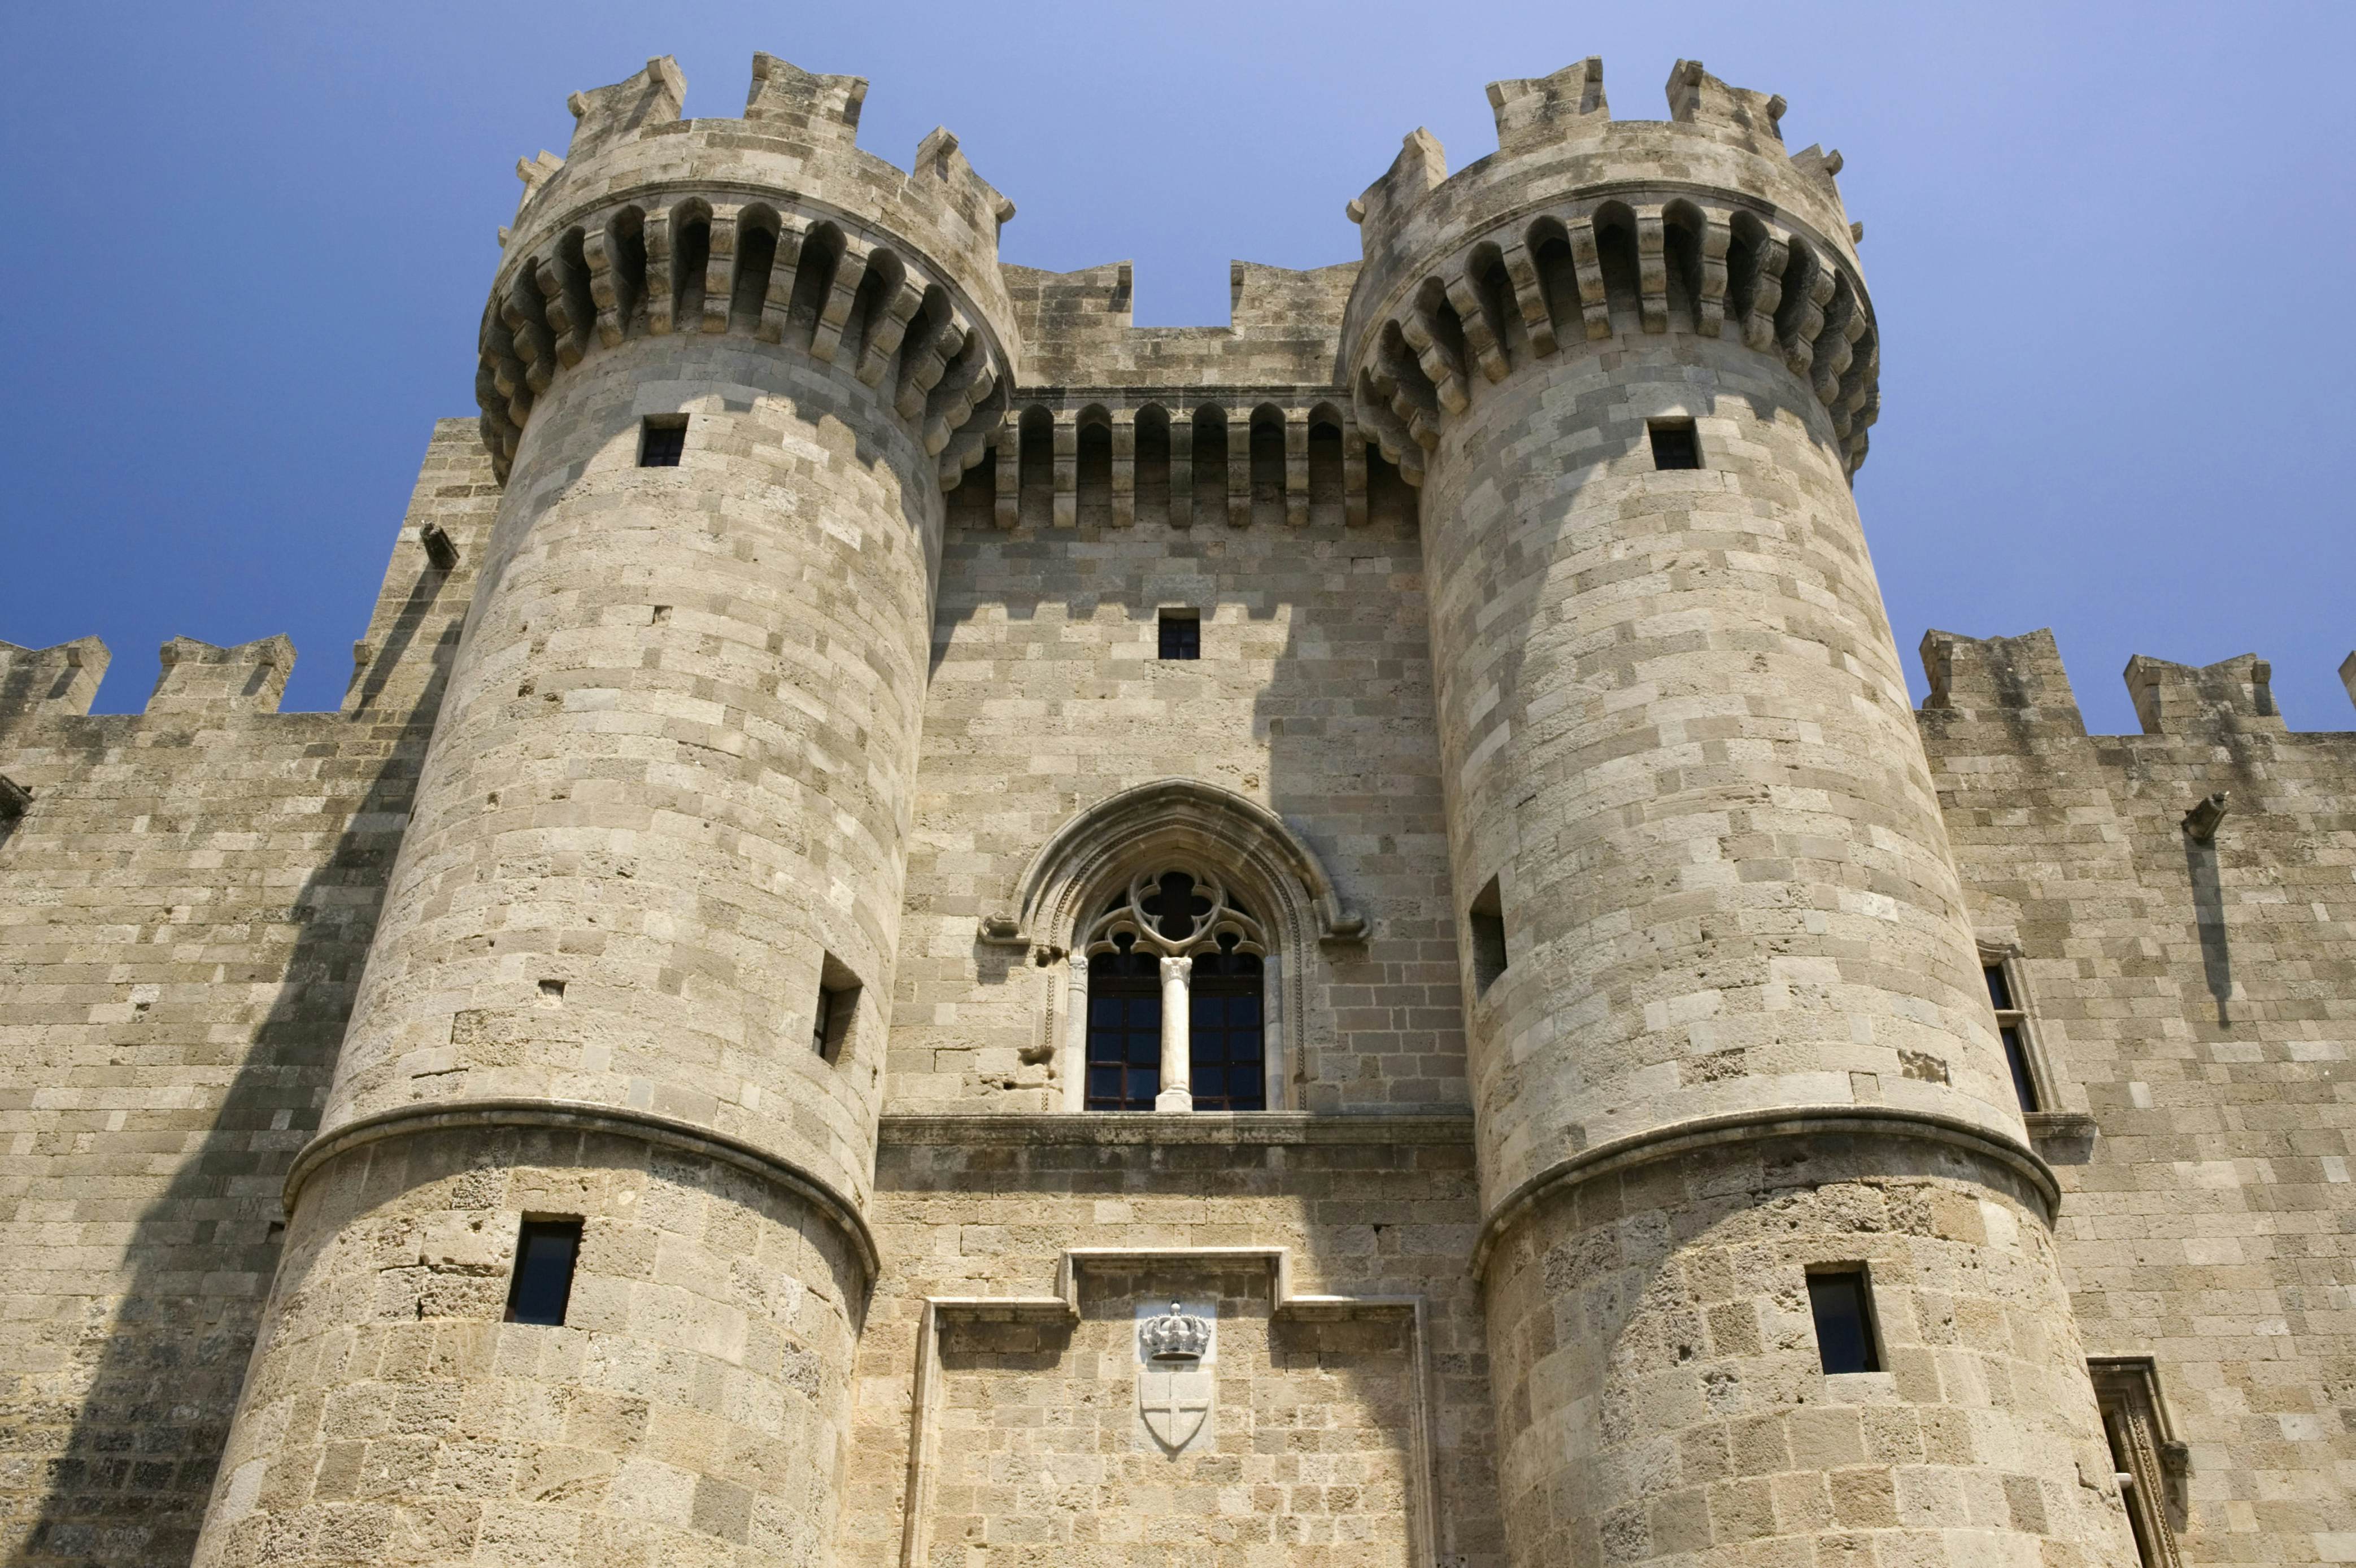 File:Palace of the Grand Masters, Rhodes.jpg - Wikimedia Commons